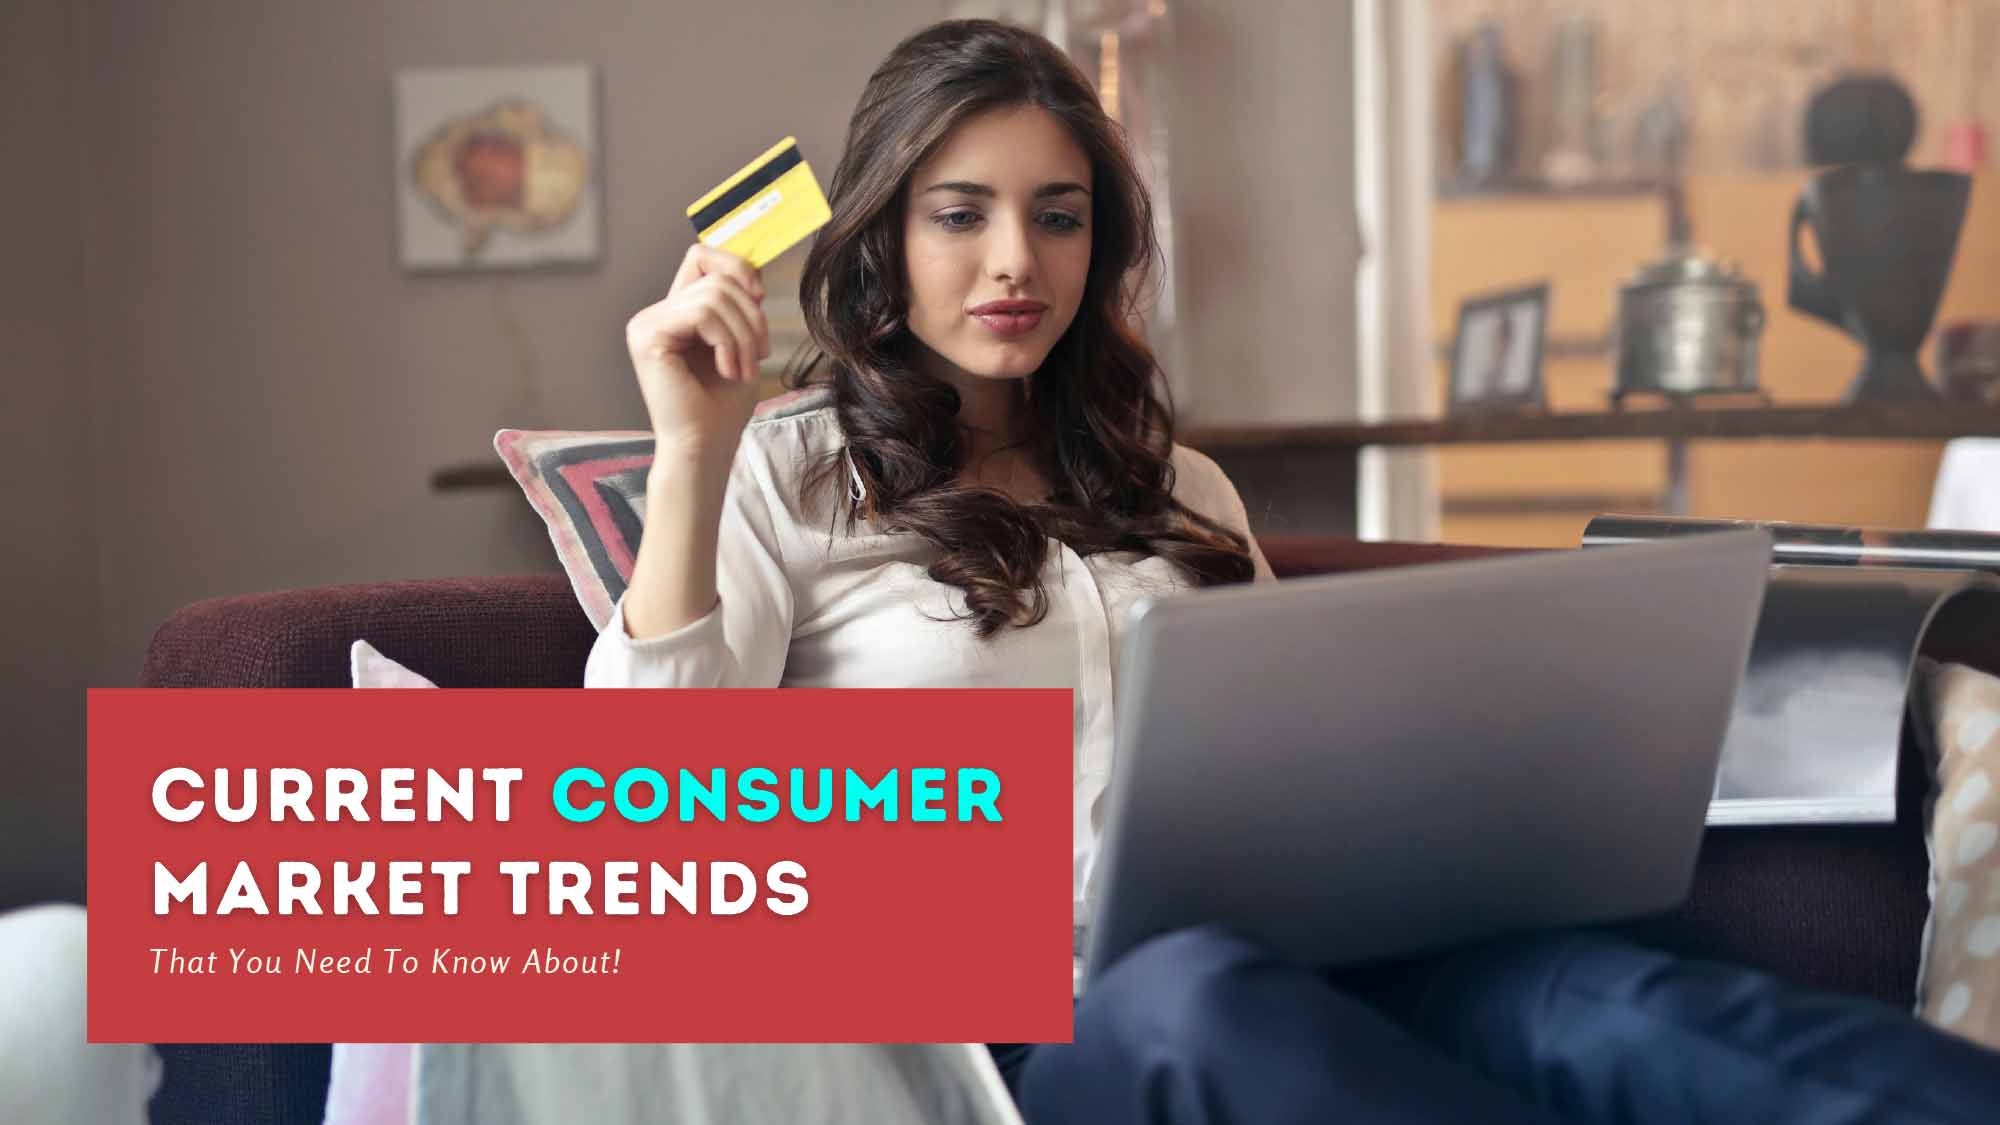 Current Consumer Market Trends That You Need To Know About!